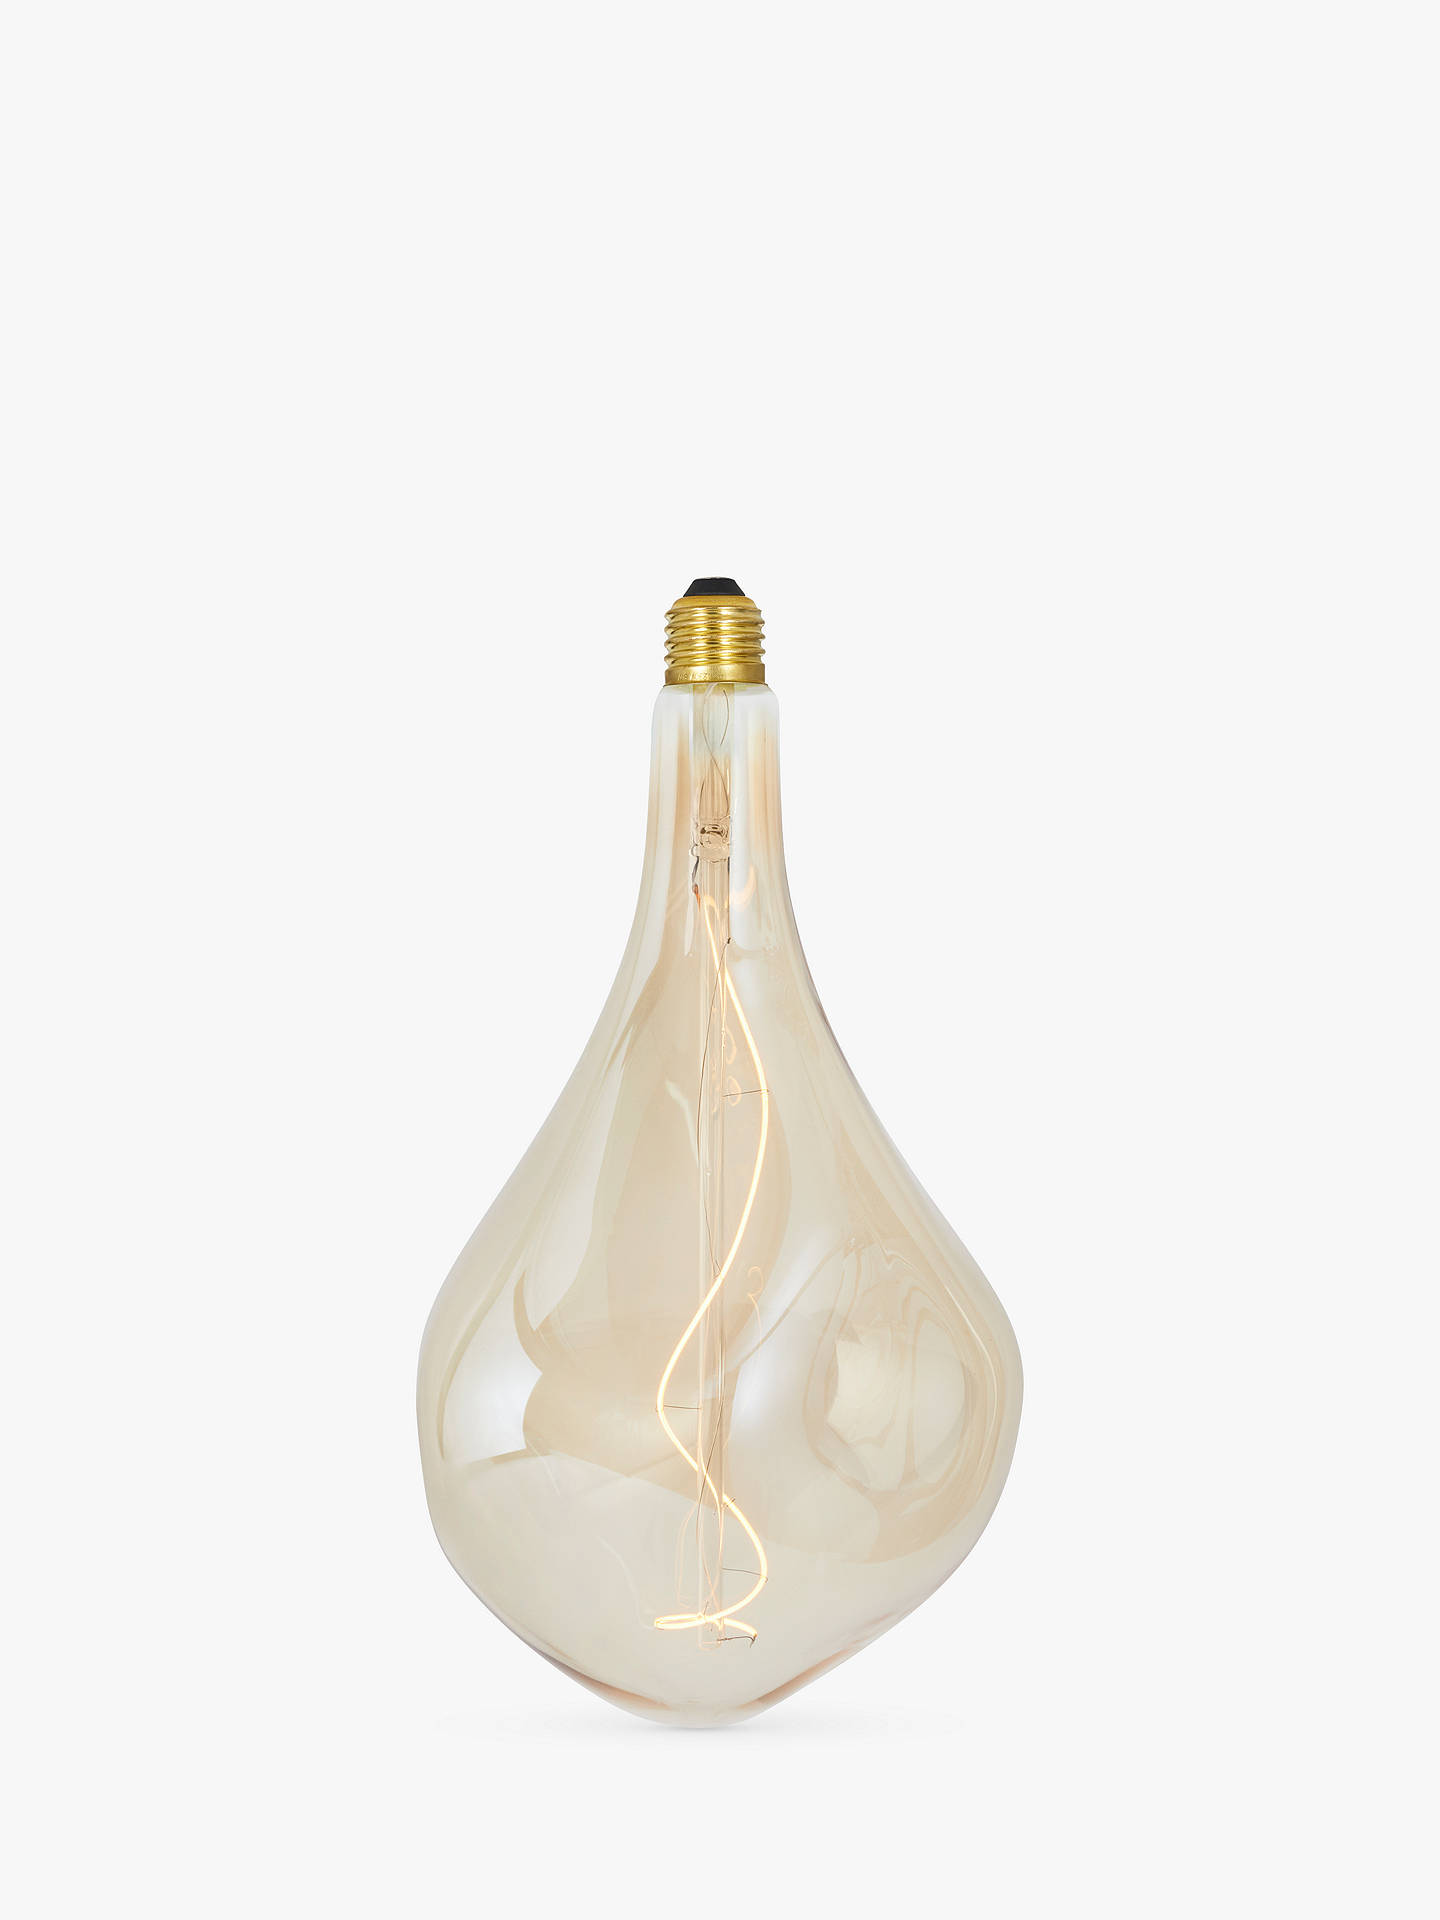 Tala Voronoi III 5W ES LED Dimmable Bulb, Clear/Gold at John Lewis